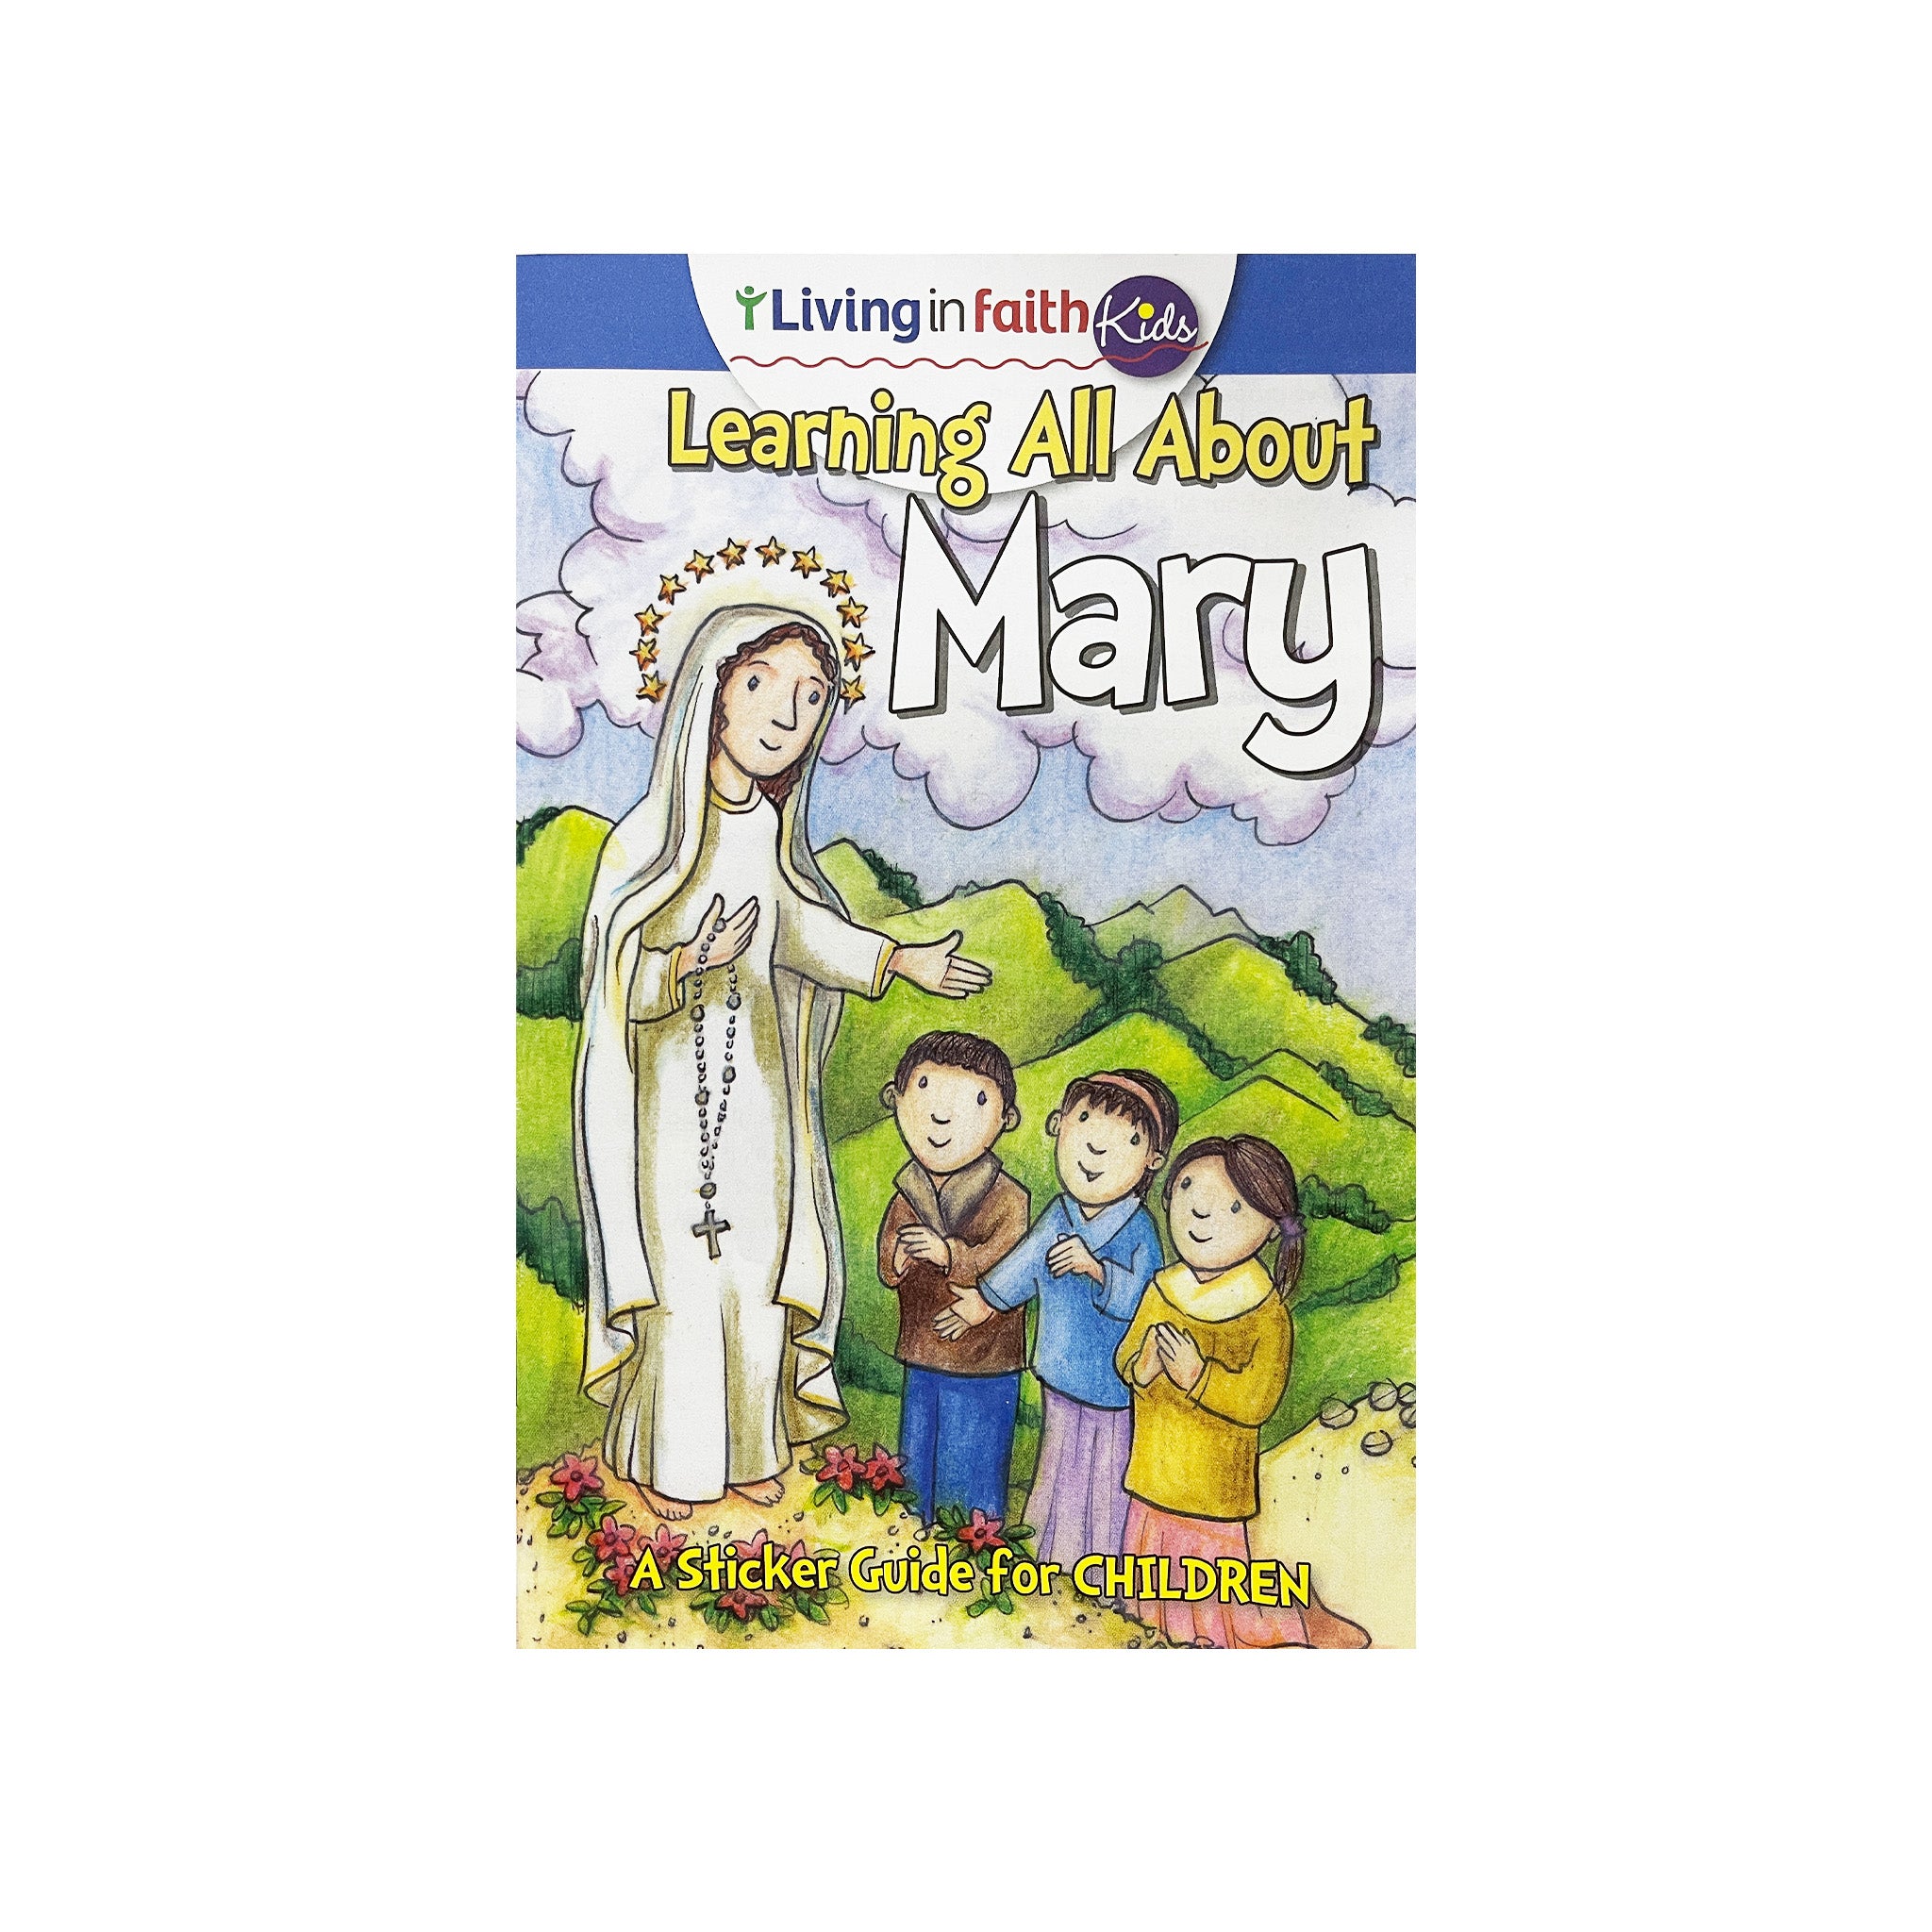 LIVING IN FAITH LEARNING LEARNING ALL ABOUT MARY